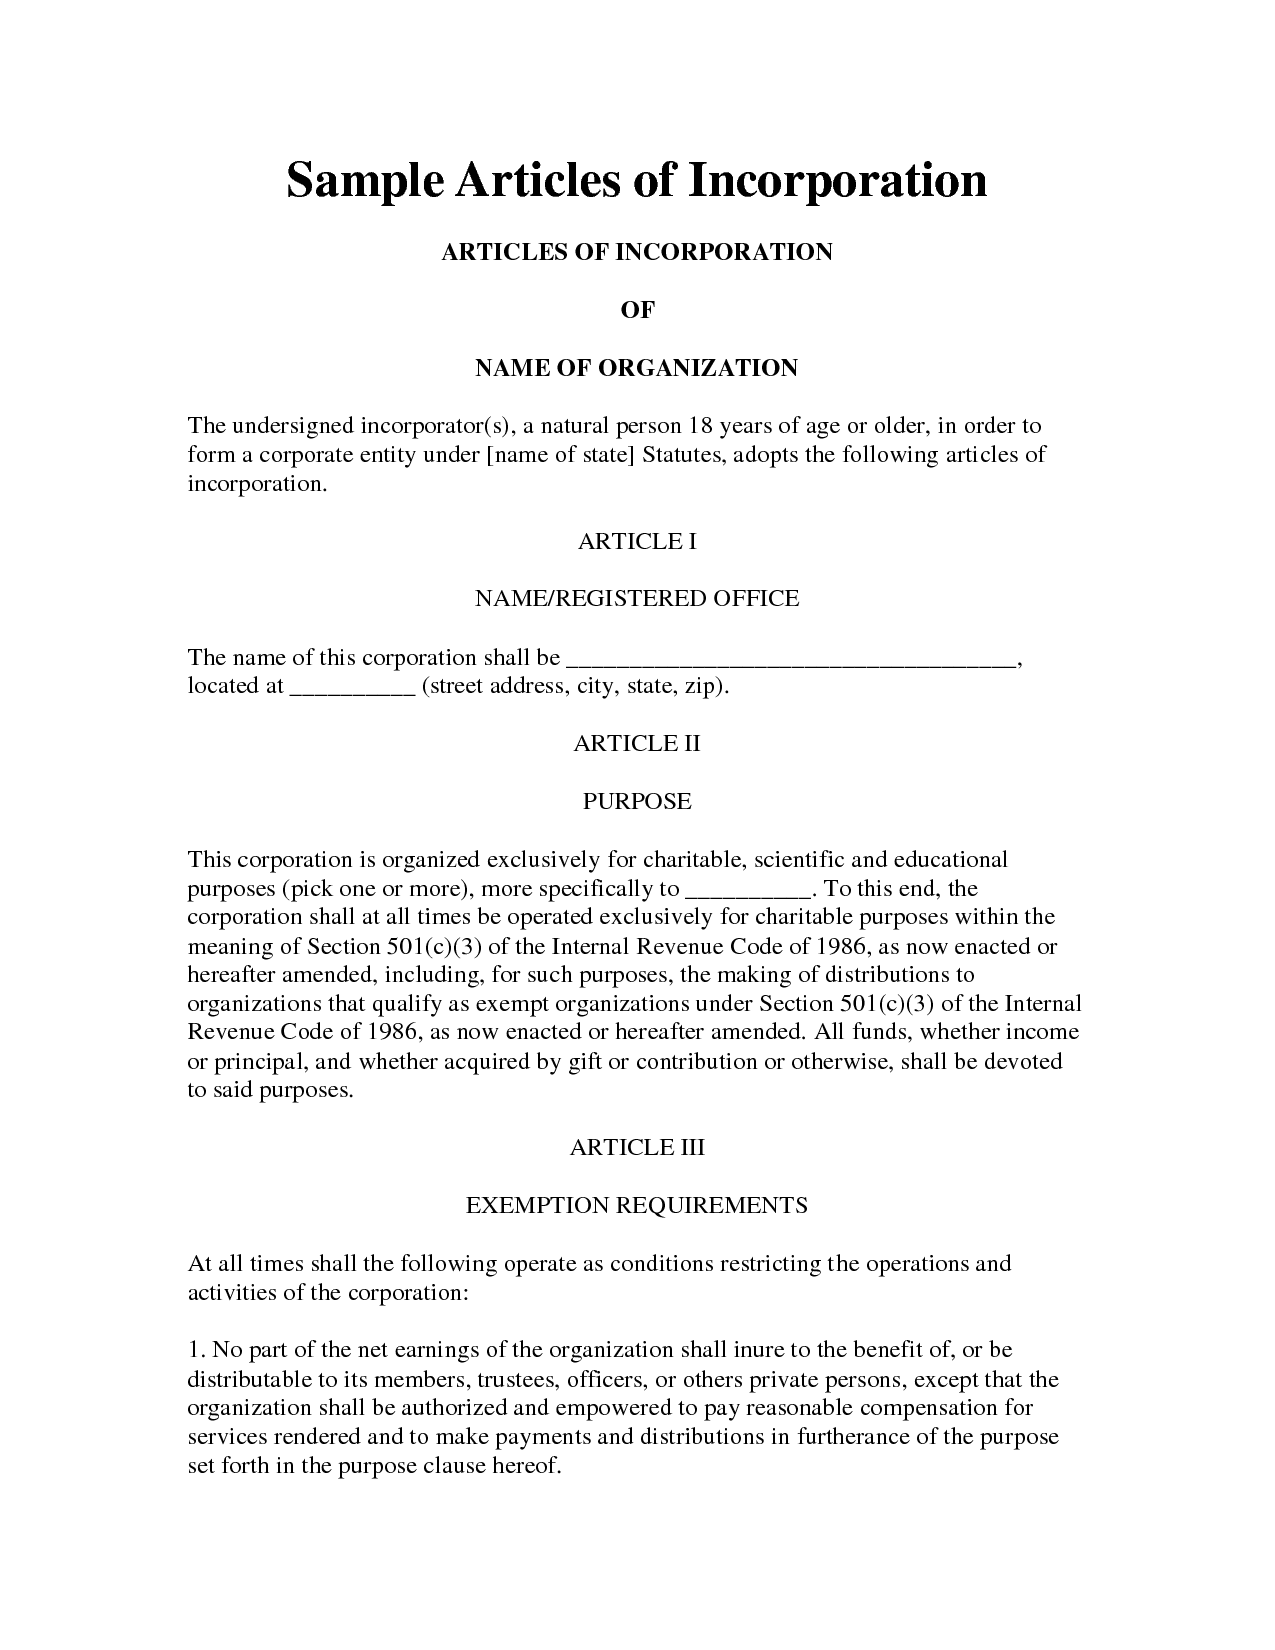 sample-articles-of-incorporation-company-documents-for-articles-of-organization-template